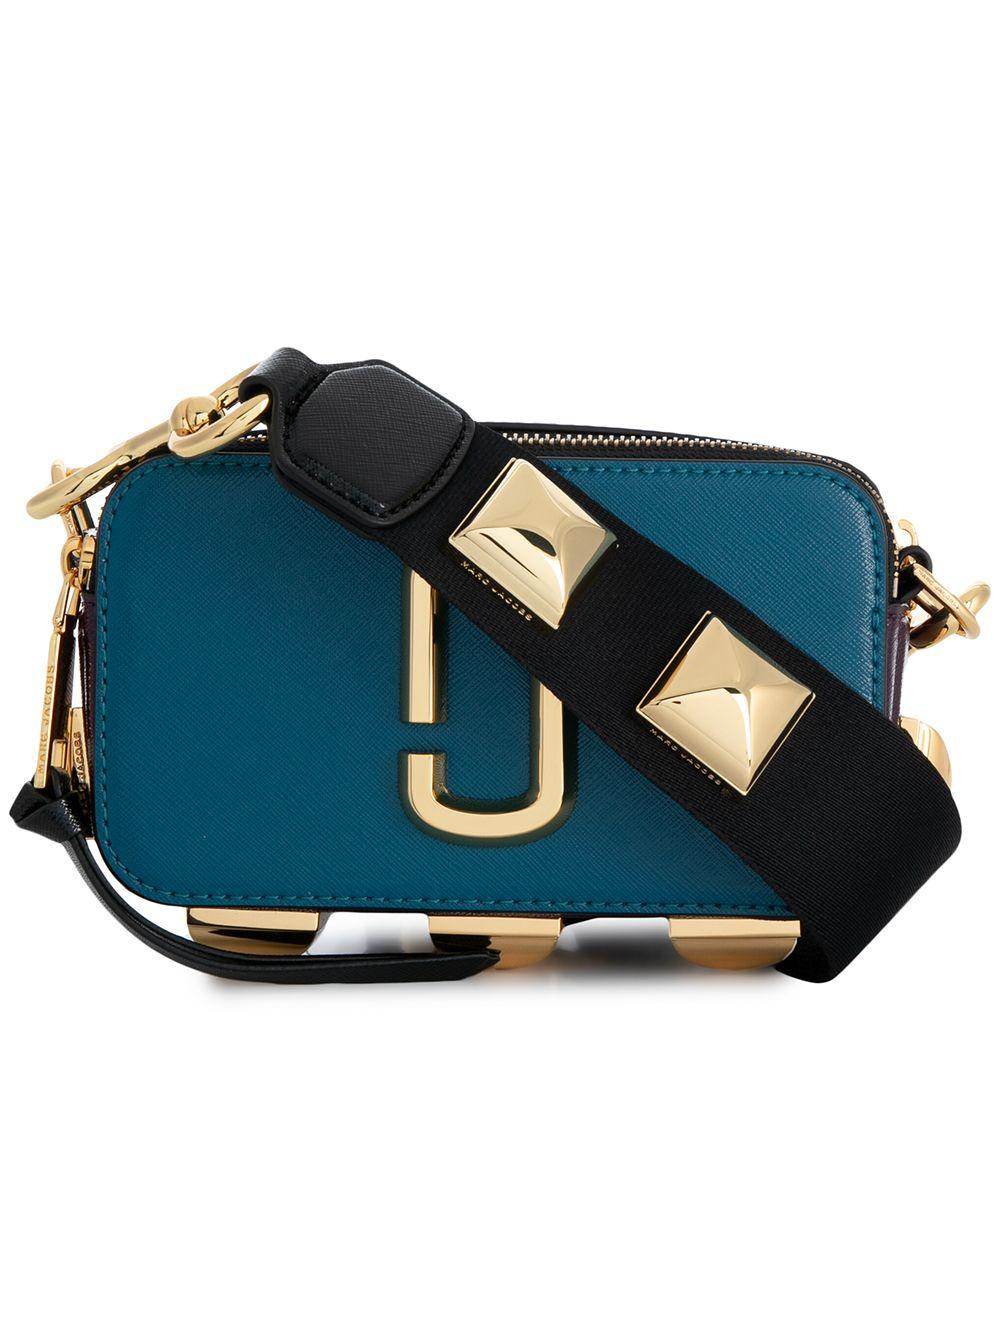 Marc Jacobs Leather Snapshot Crossbody Bag in Blue - Lyst